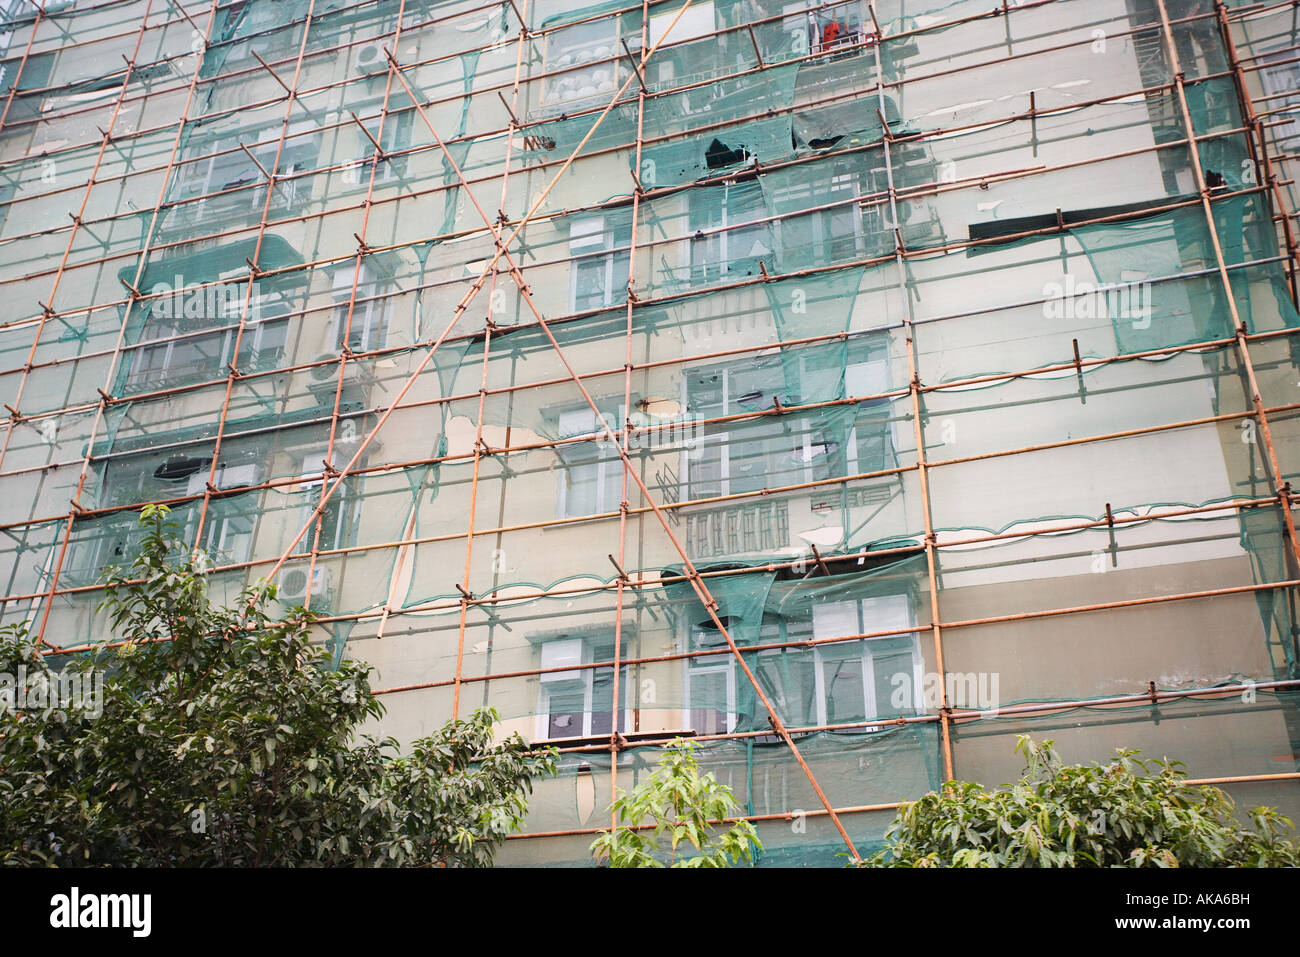 Scaffolding on apartment building Stock Photo